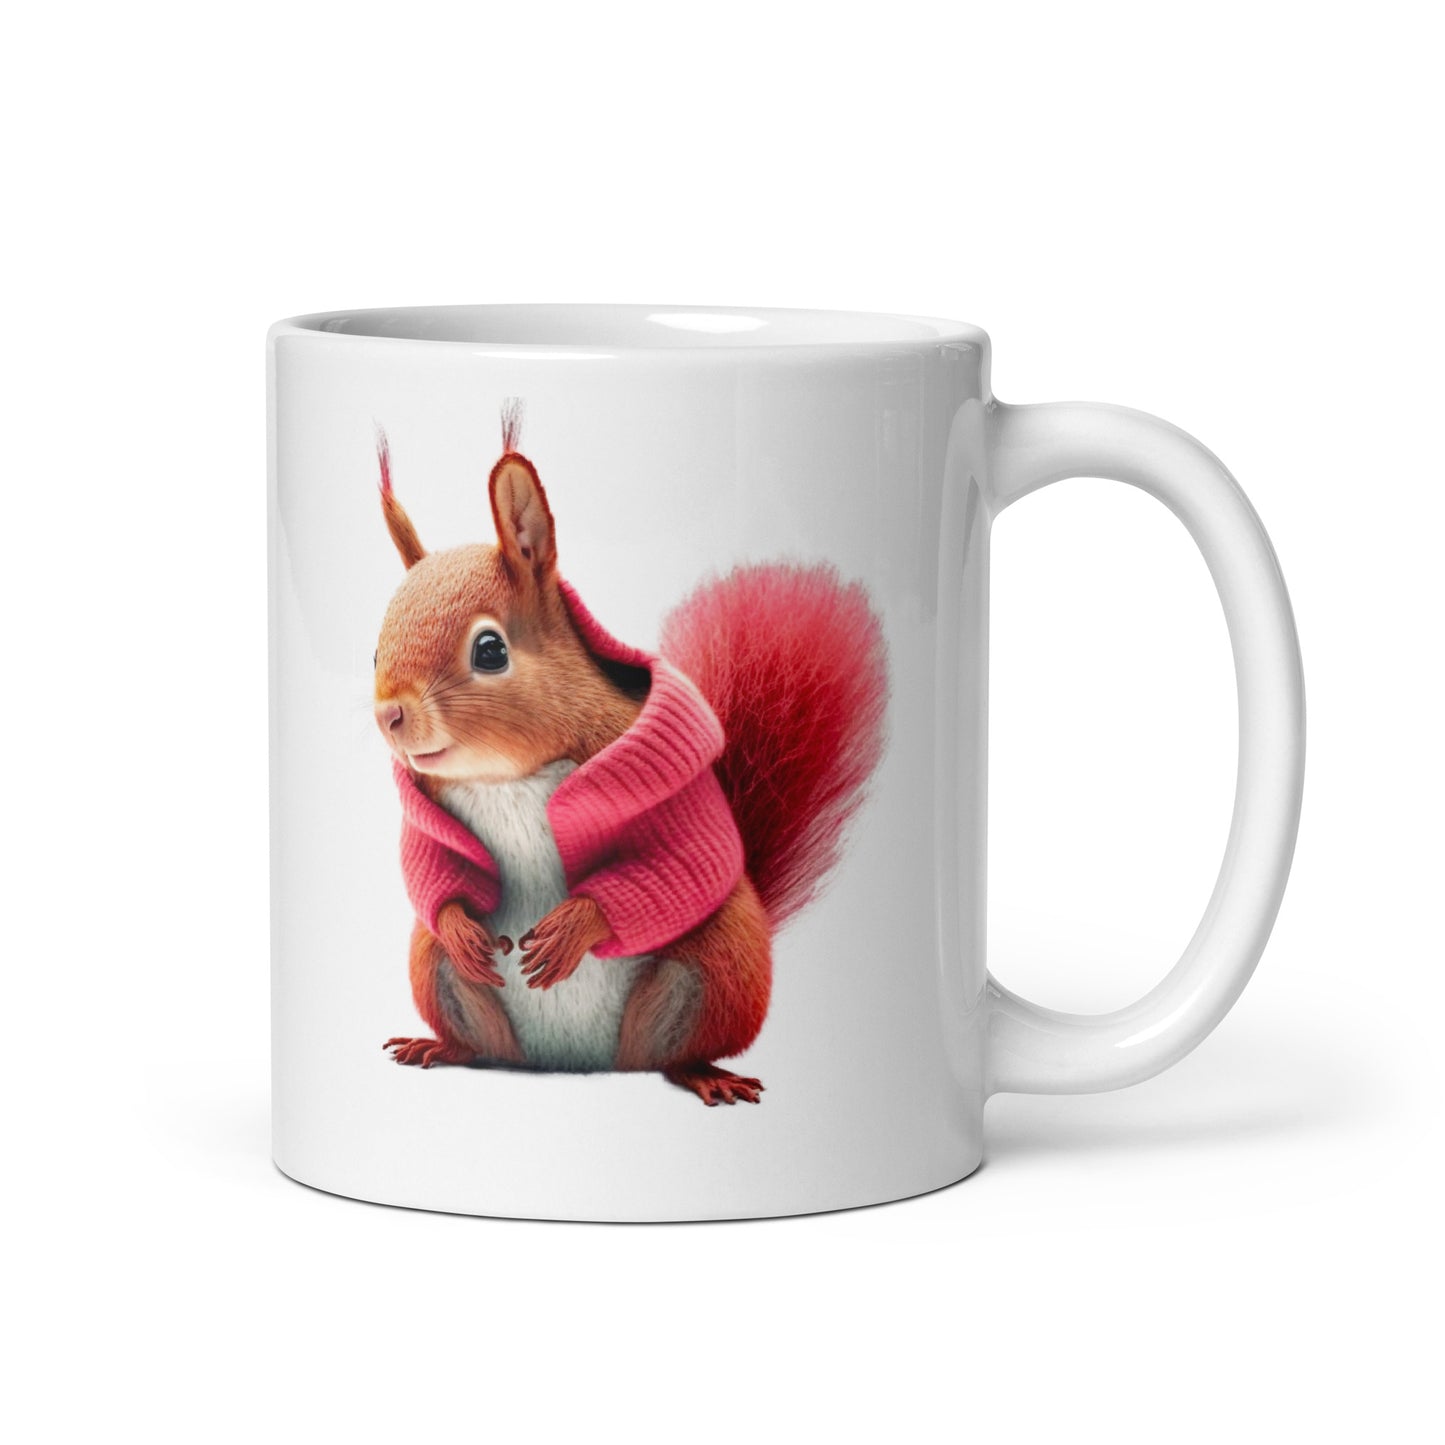 Glossy Mug Printed with a Squirrel in a Jumper.